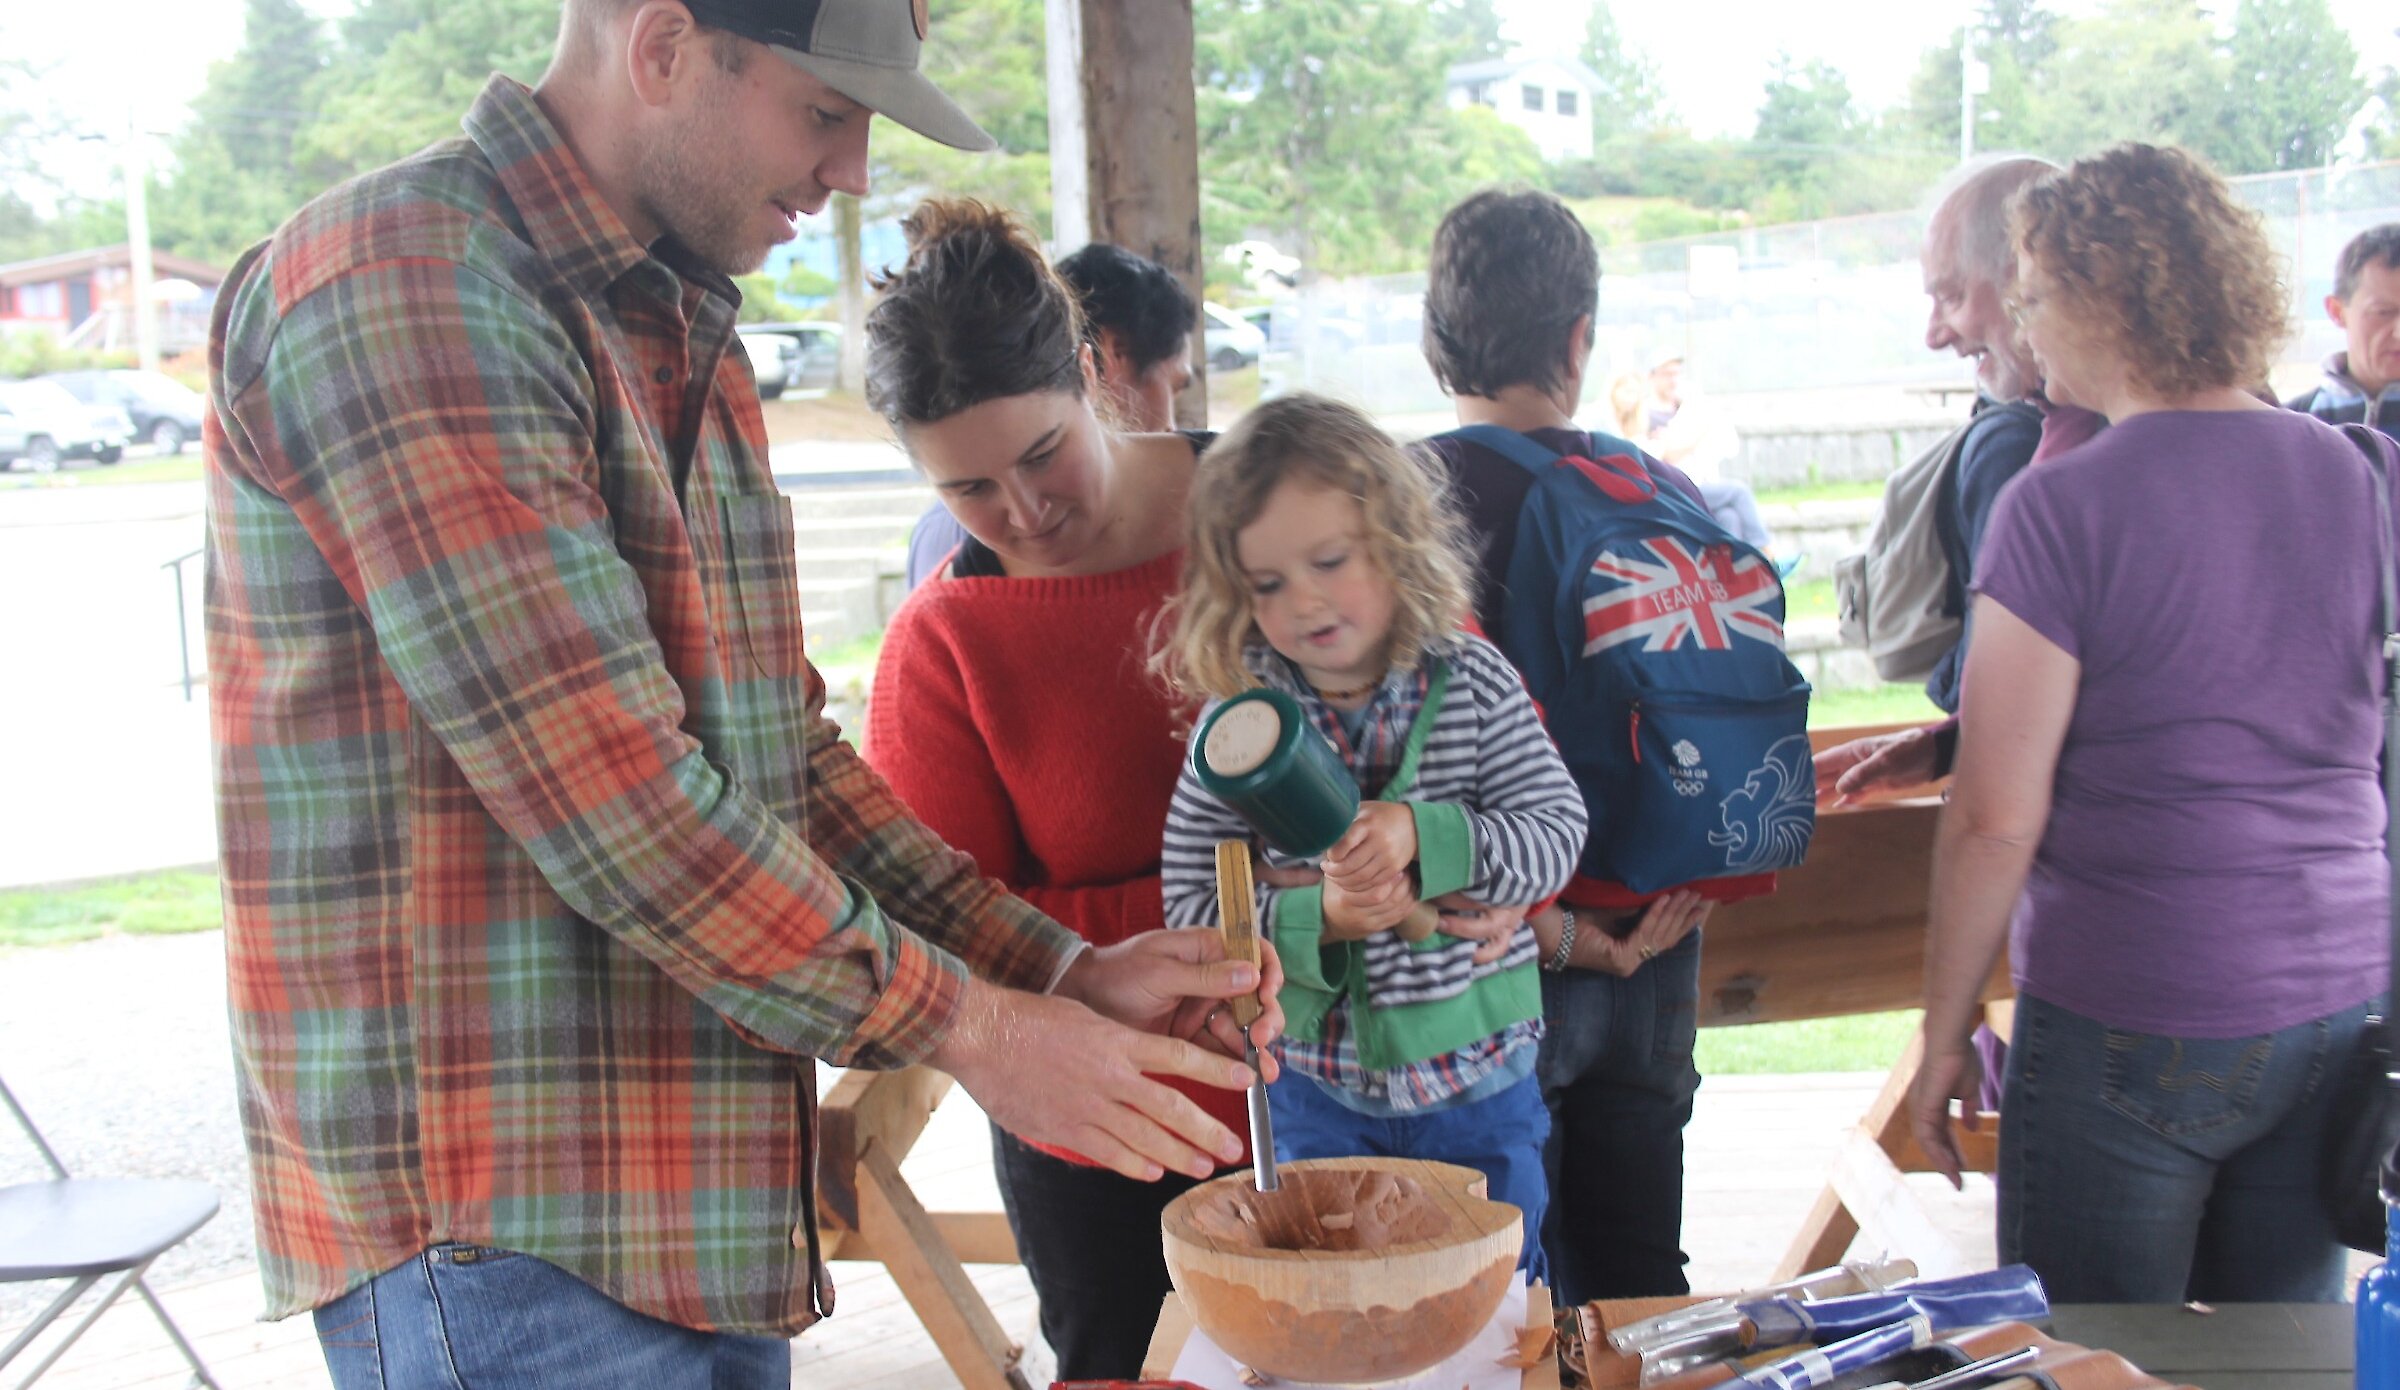 Wood carving artist teaching small child to carve